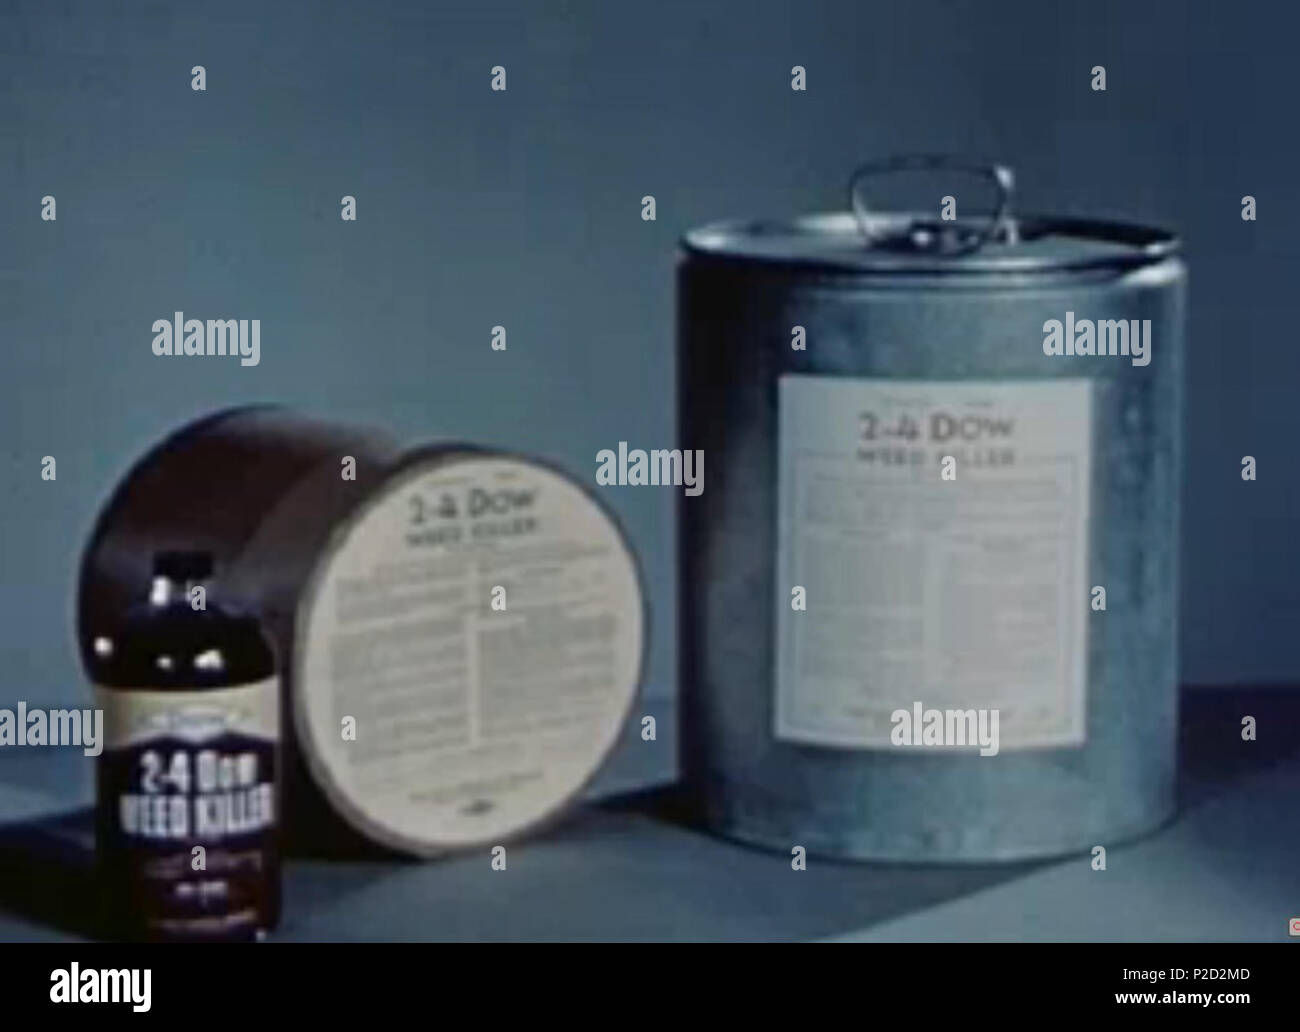 . English: Screen capture from the 2:38 mark showing various containers of 2-4 Dow weed killer. Sharpened a bit using GIMP. 1947. Producer: Handy (Jam) Organization Sponsor: Dow Chemical Corporation 2 2-4 Dow weed killer Stock Photo